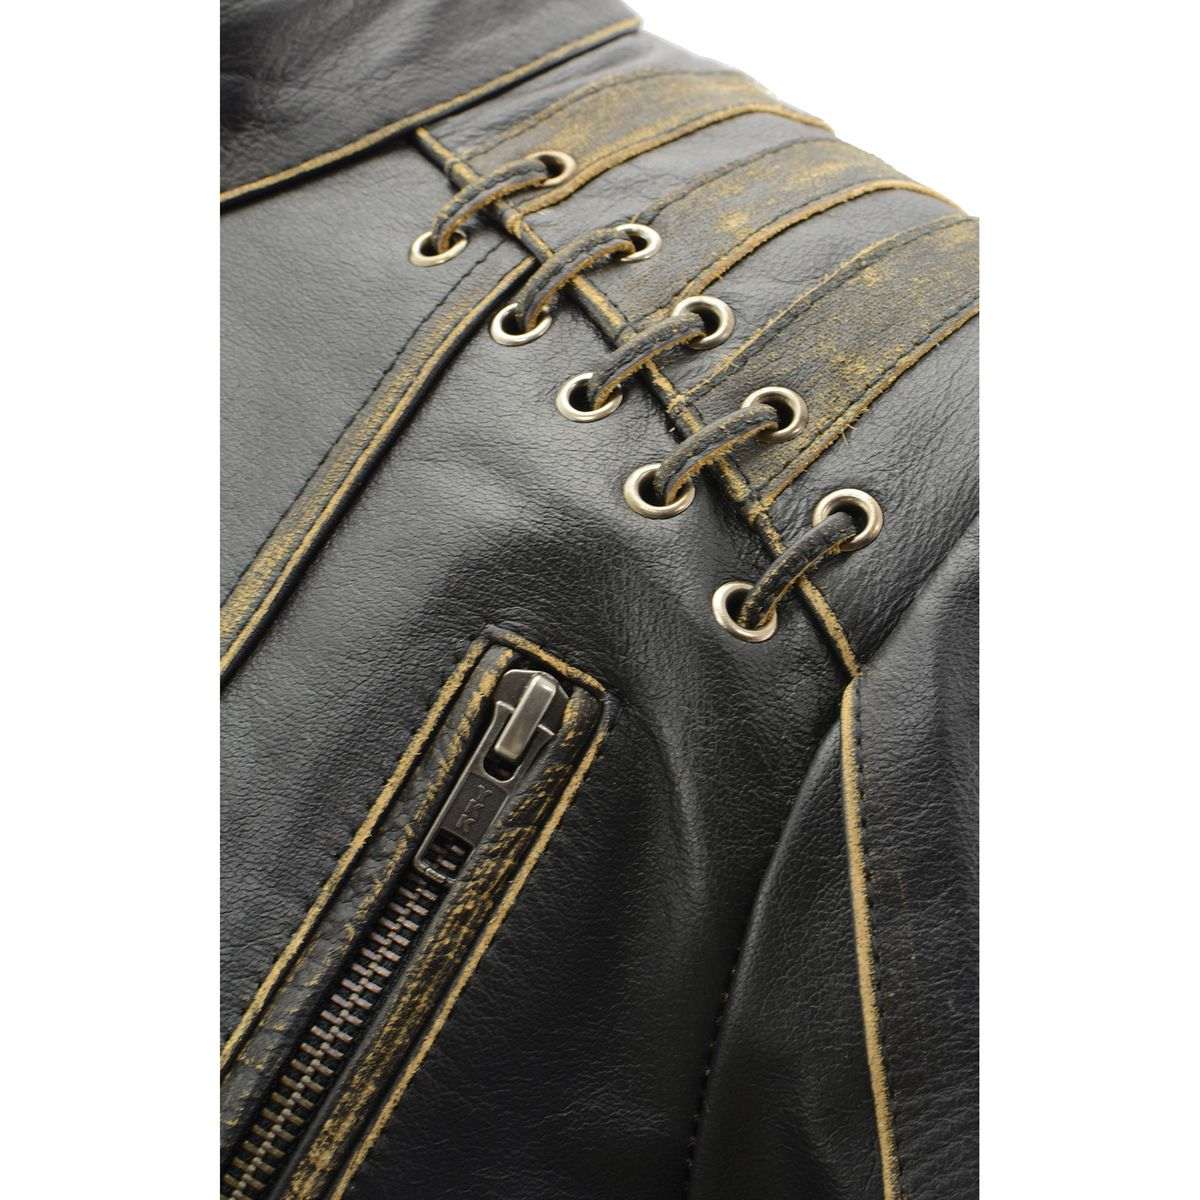 Women's 'Elegant' Distressed Brown Detail Laced Leather Jacket